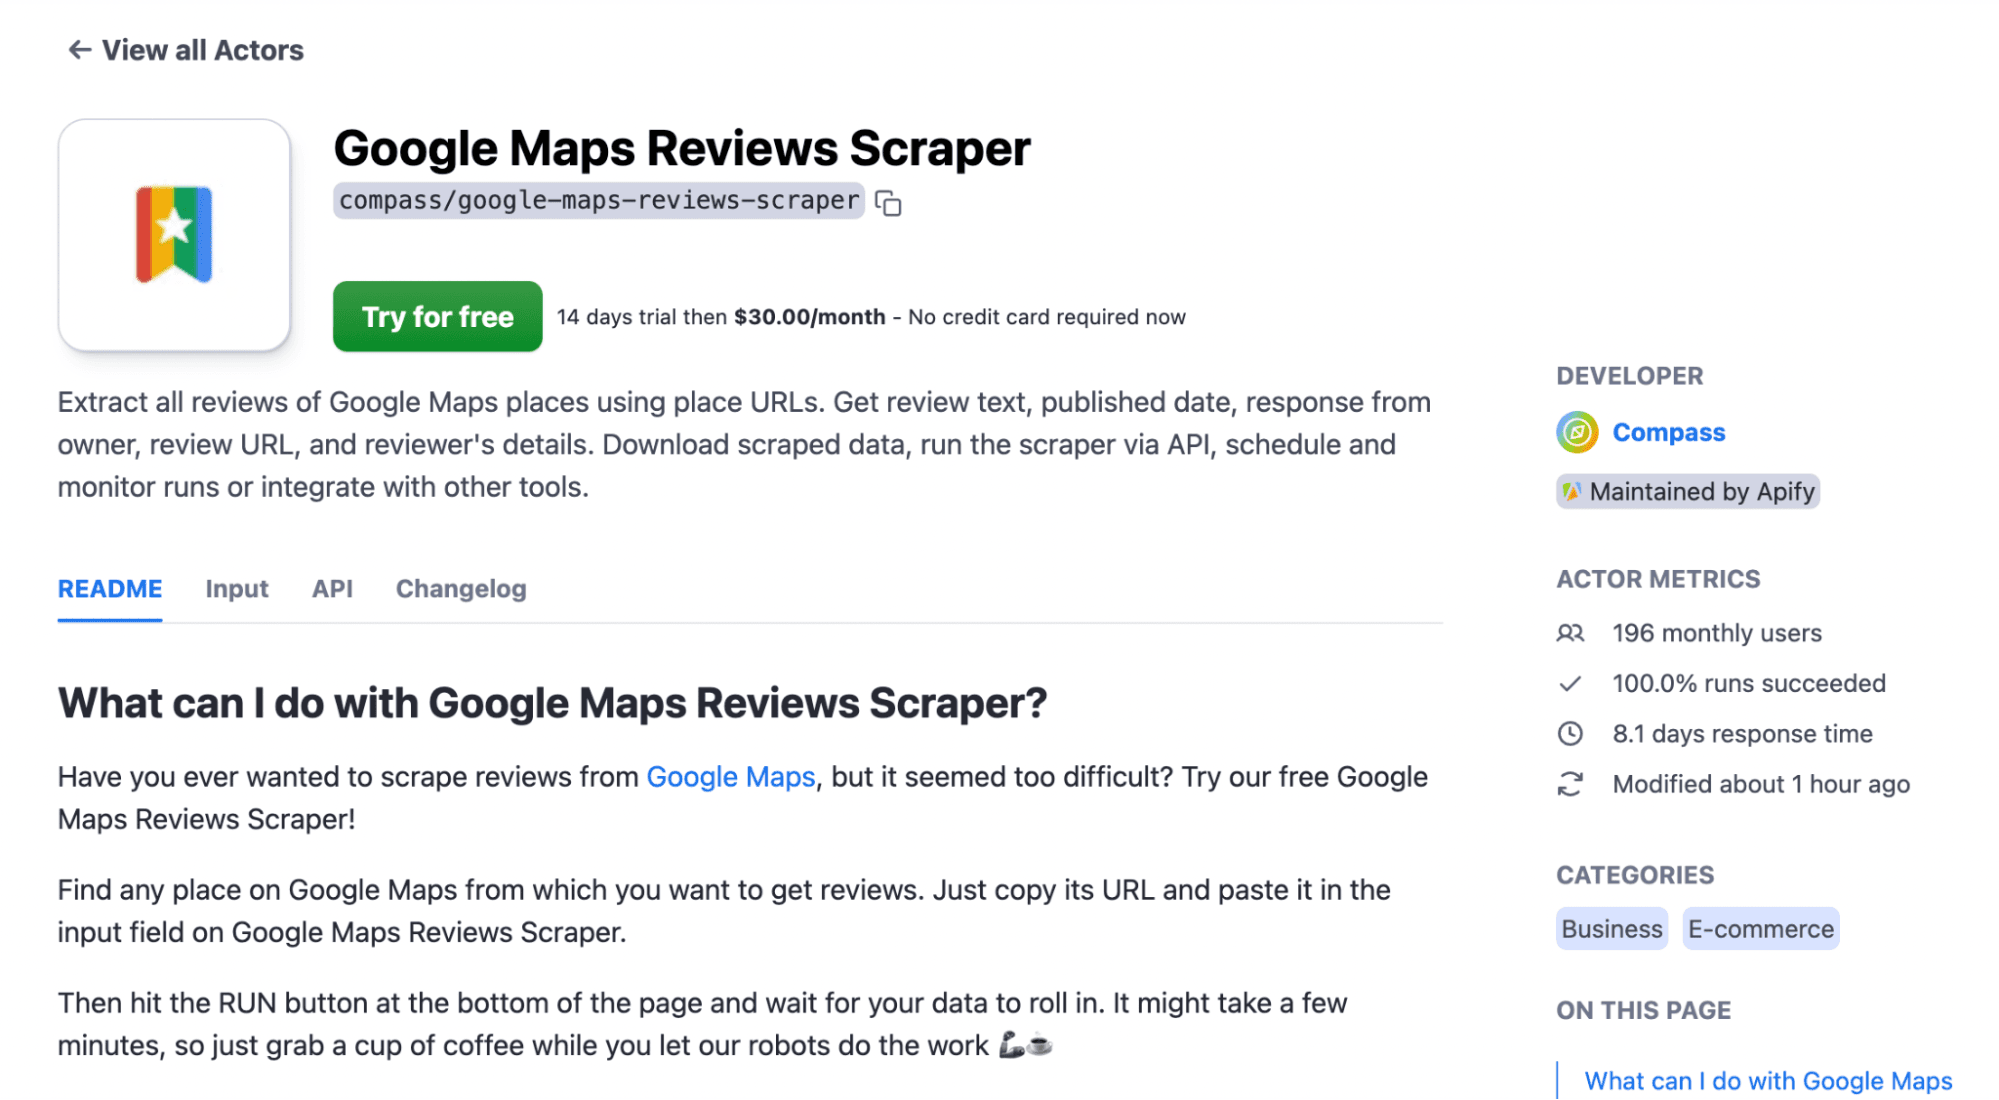 google maps reviews scraper apify product page - image10.png